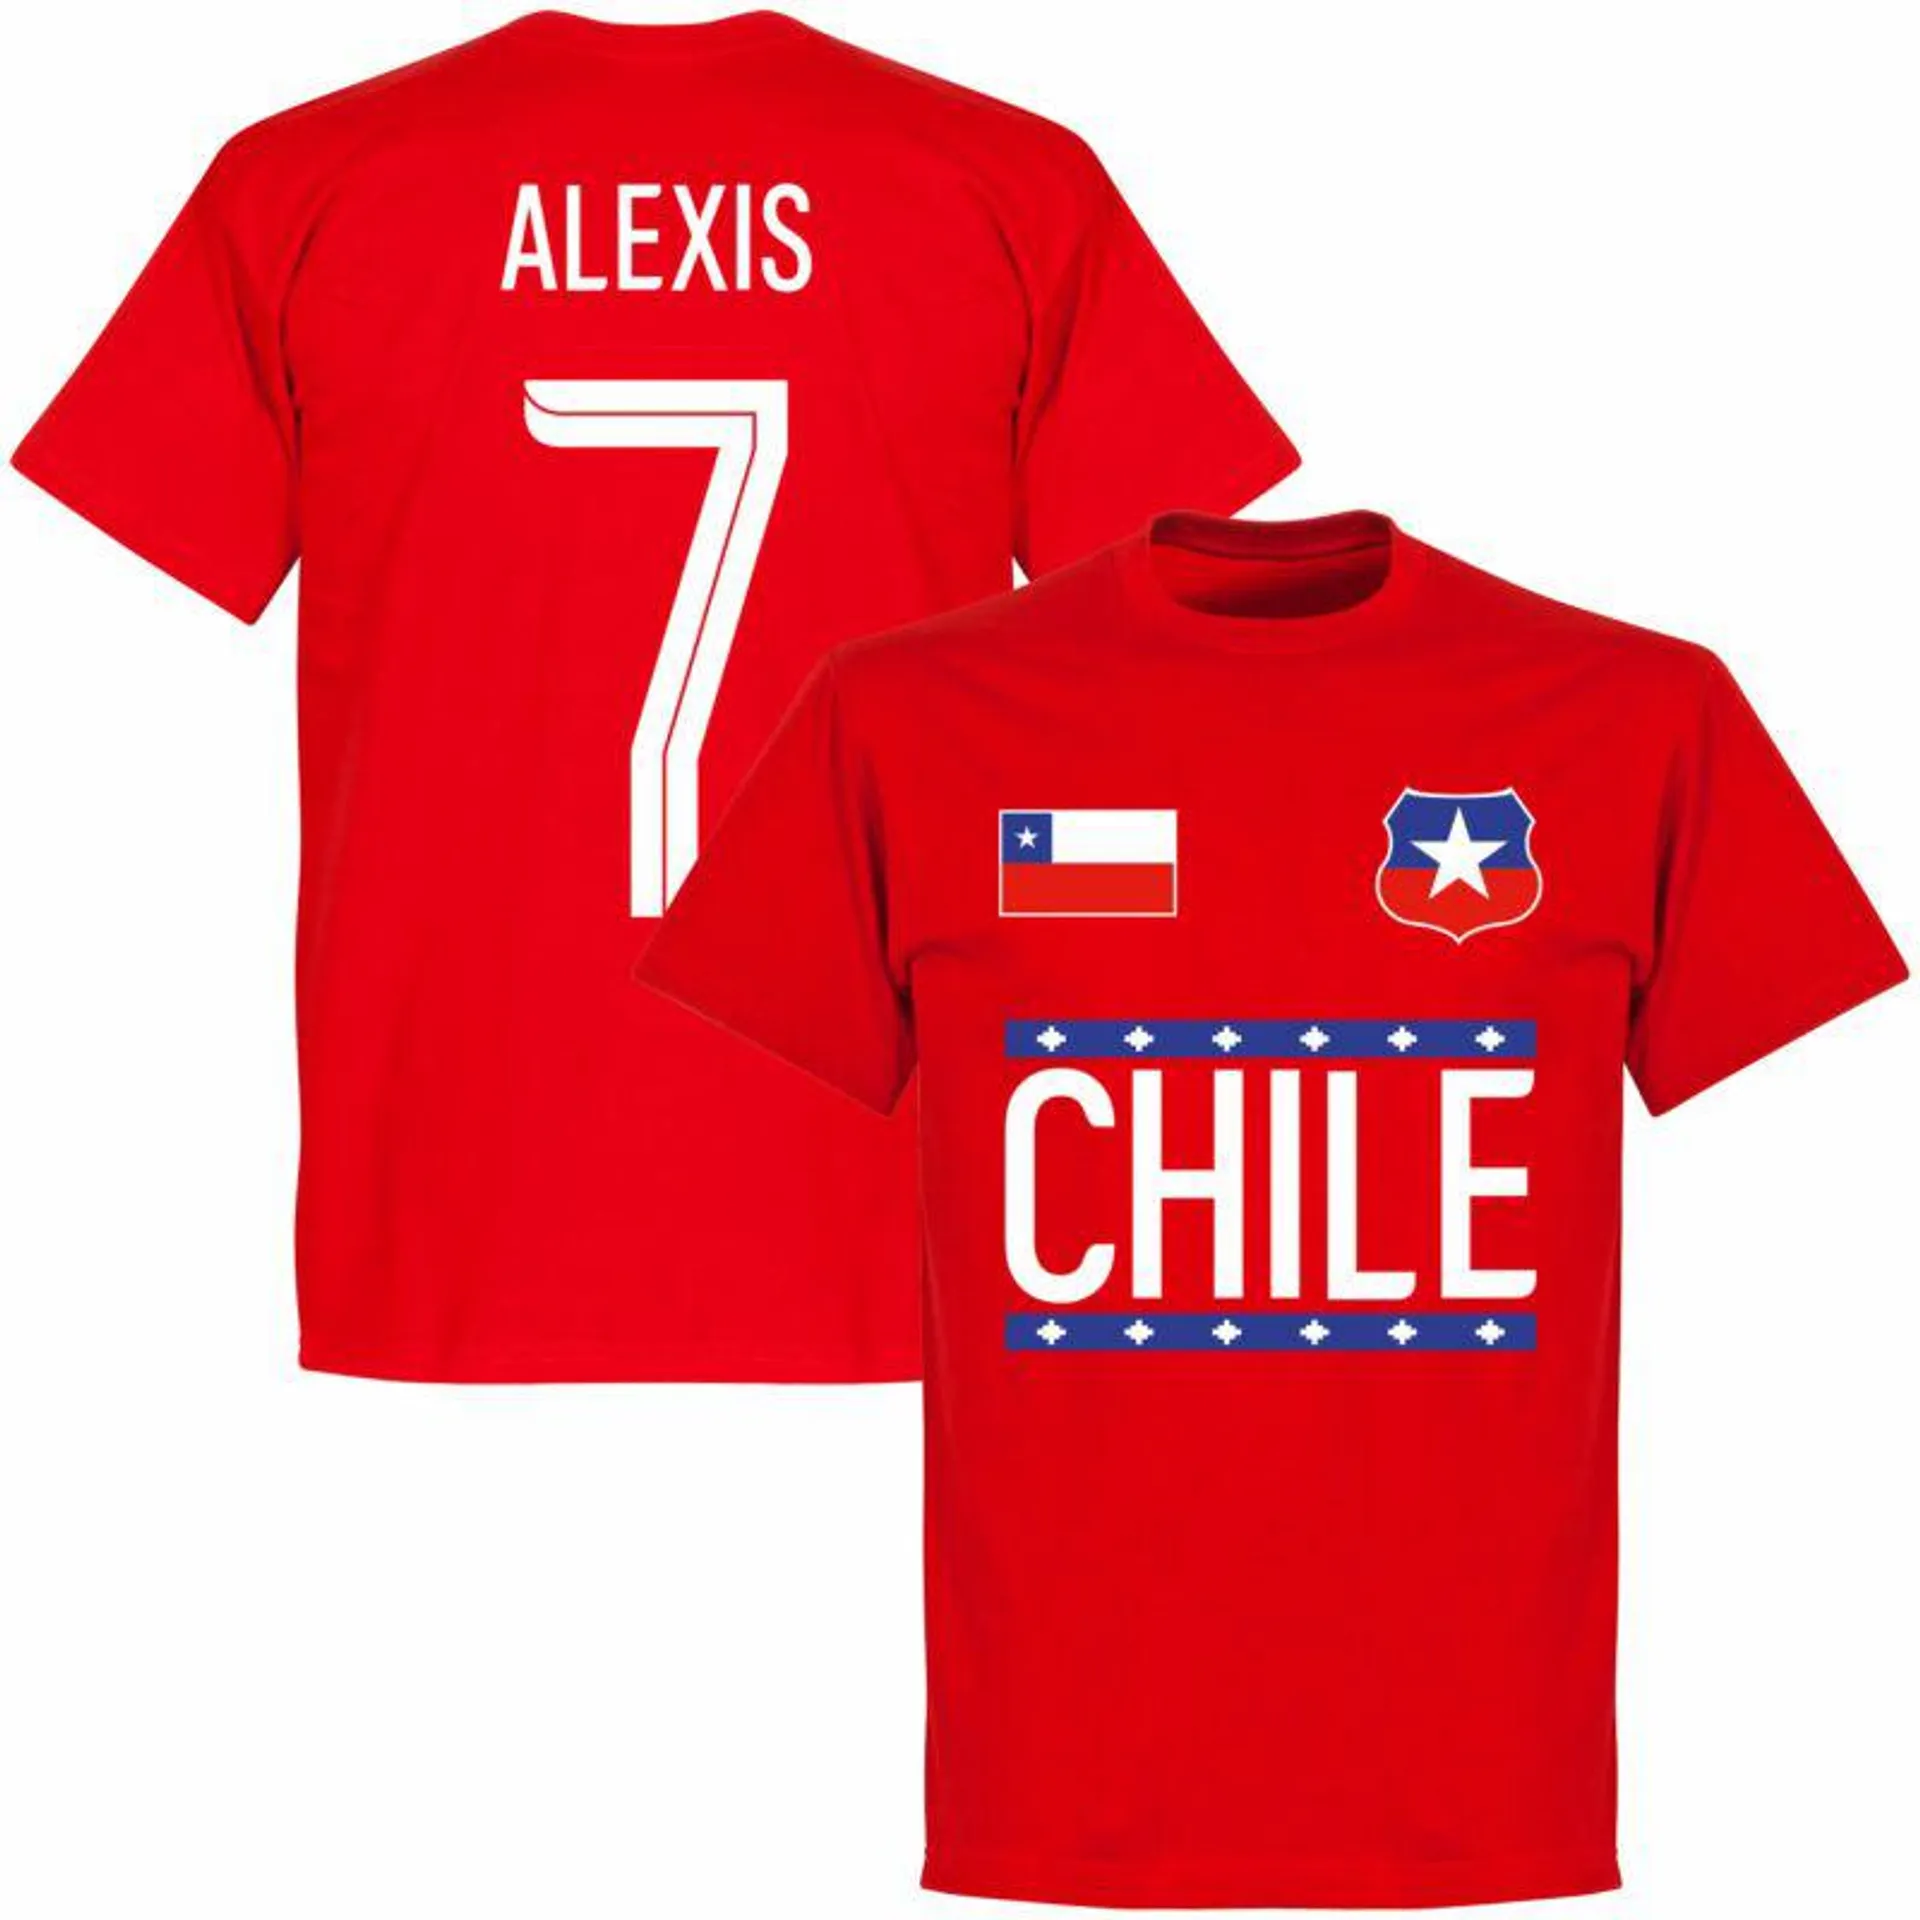 Chile Alexis 7 Team KIDS T-shirt - Red